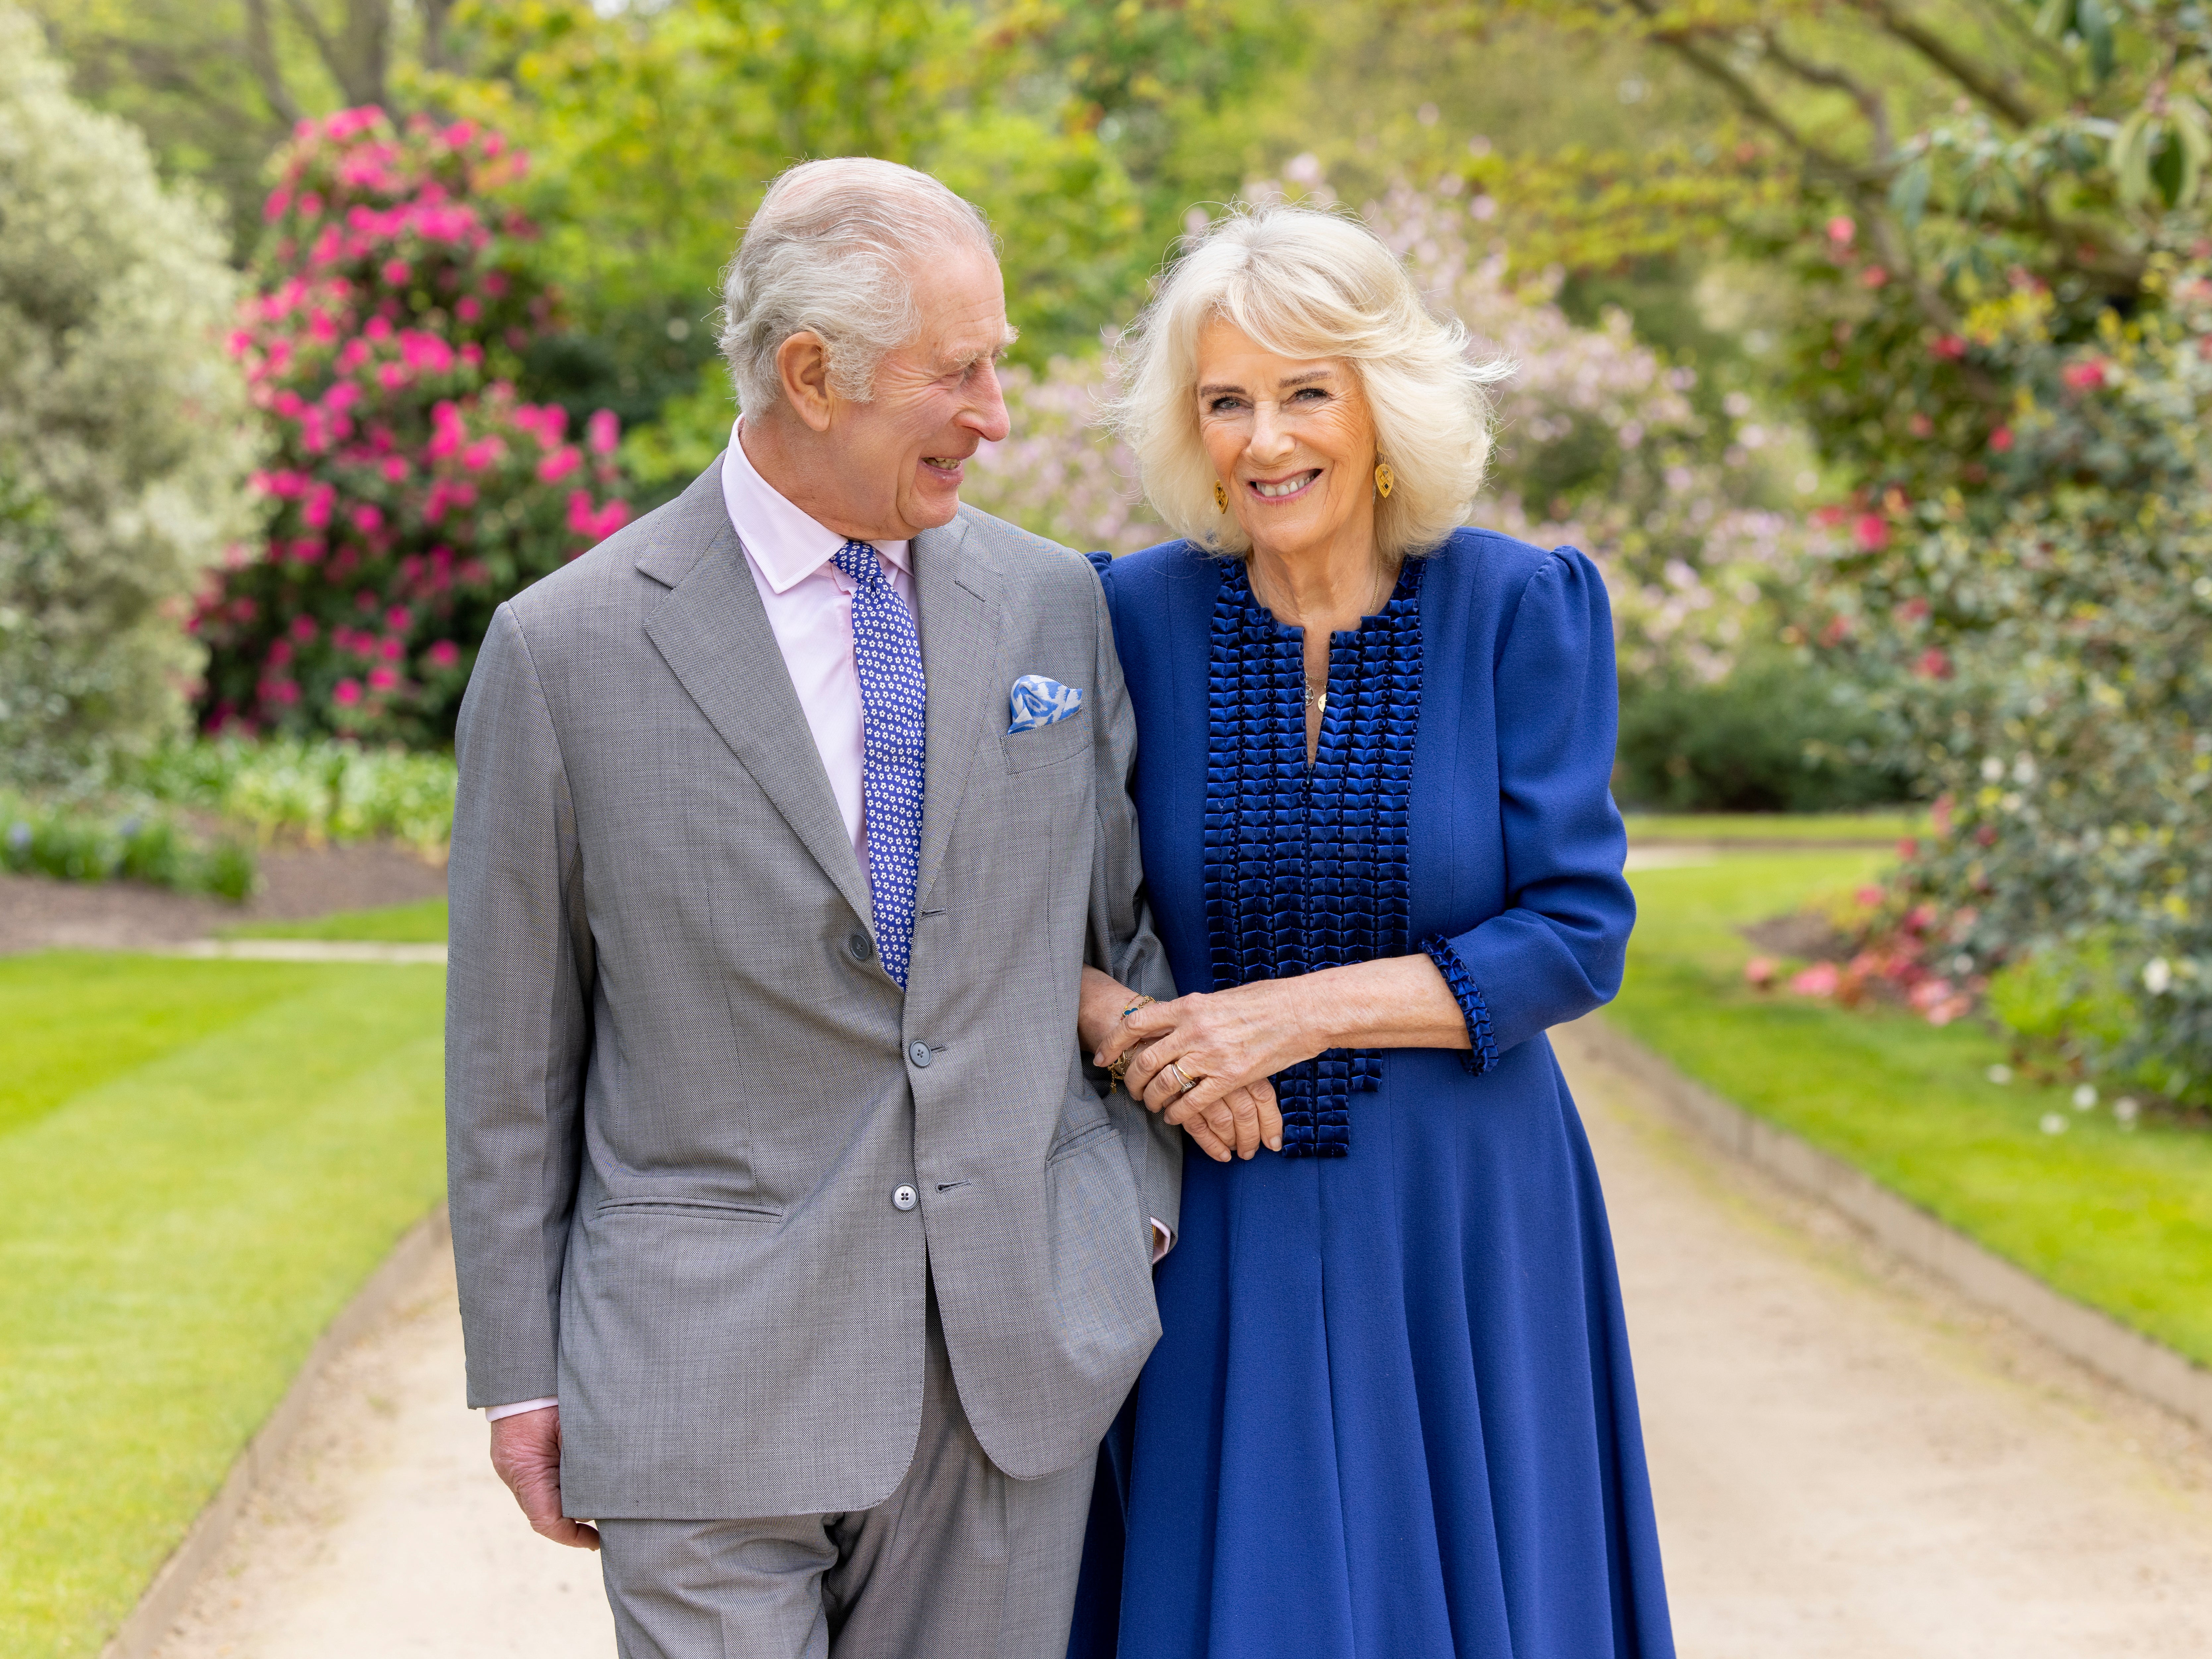 Charles and Camilla in the gardens of Buckingham Palace earlier this month